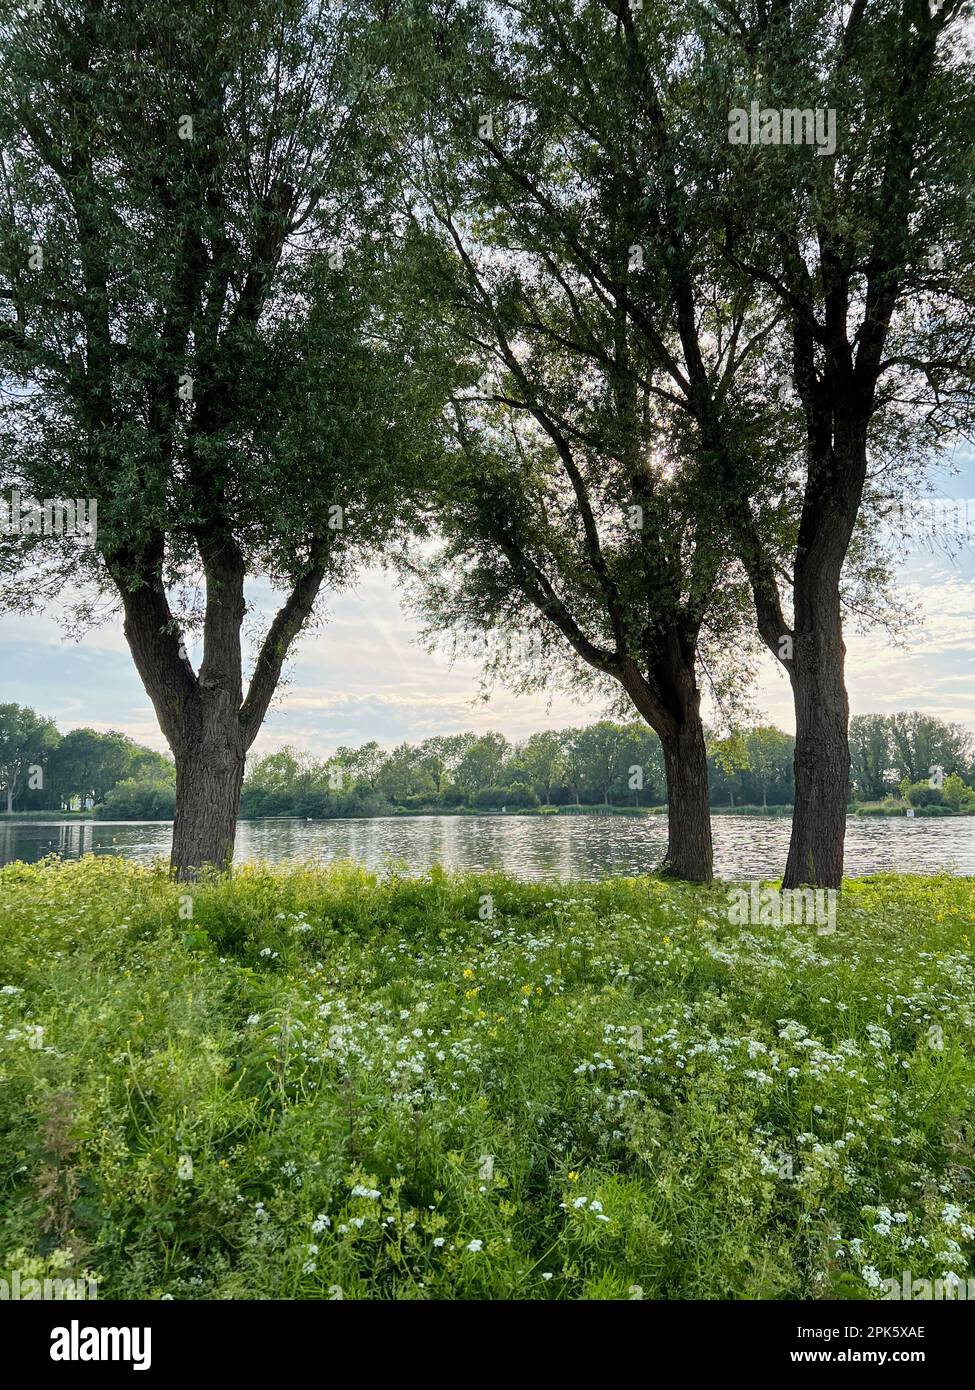 Beautiful view on green bank with trees near lake. Picturesque landscape Stock Photo